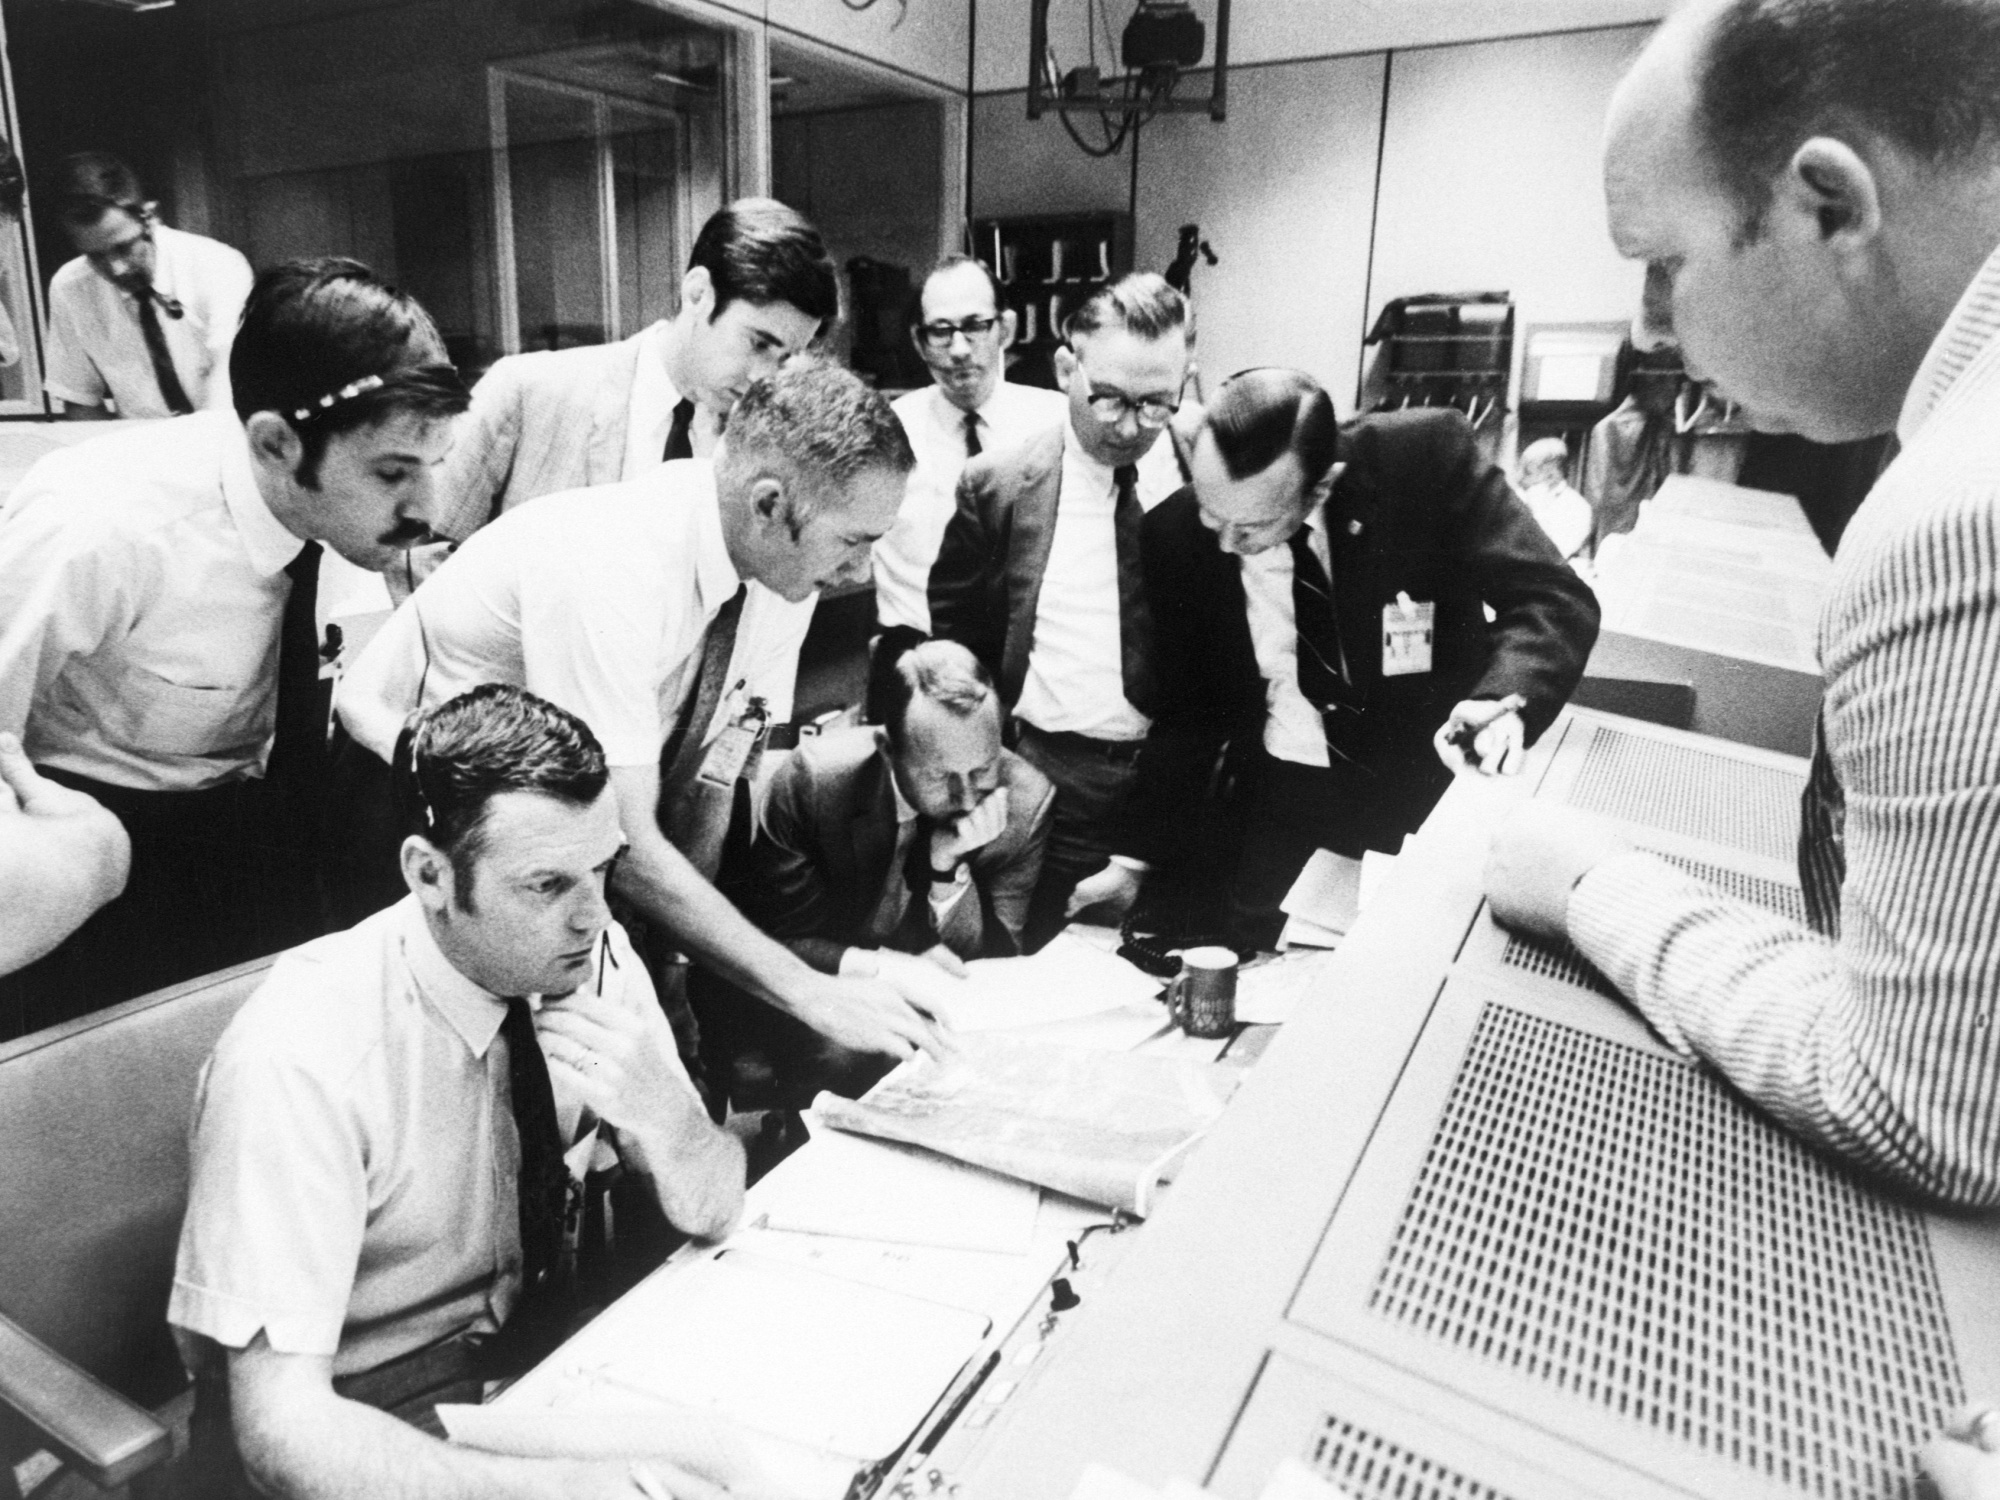 Glynn Lunney, seated at left, consulting with Apollo 13 flight controllers.